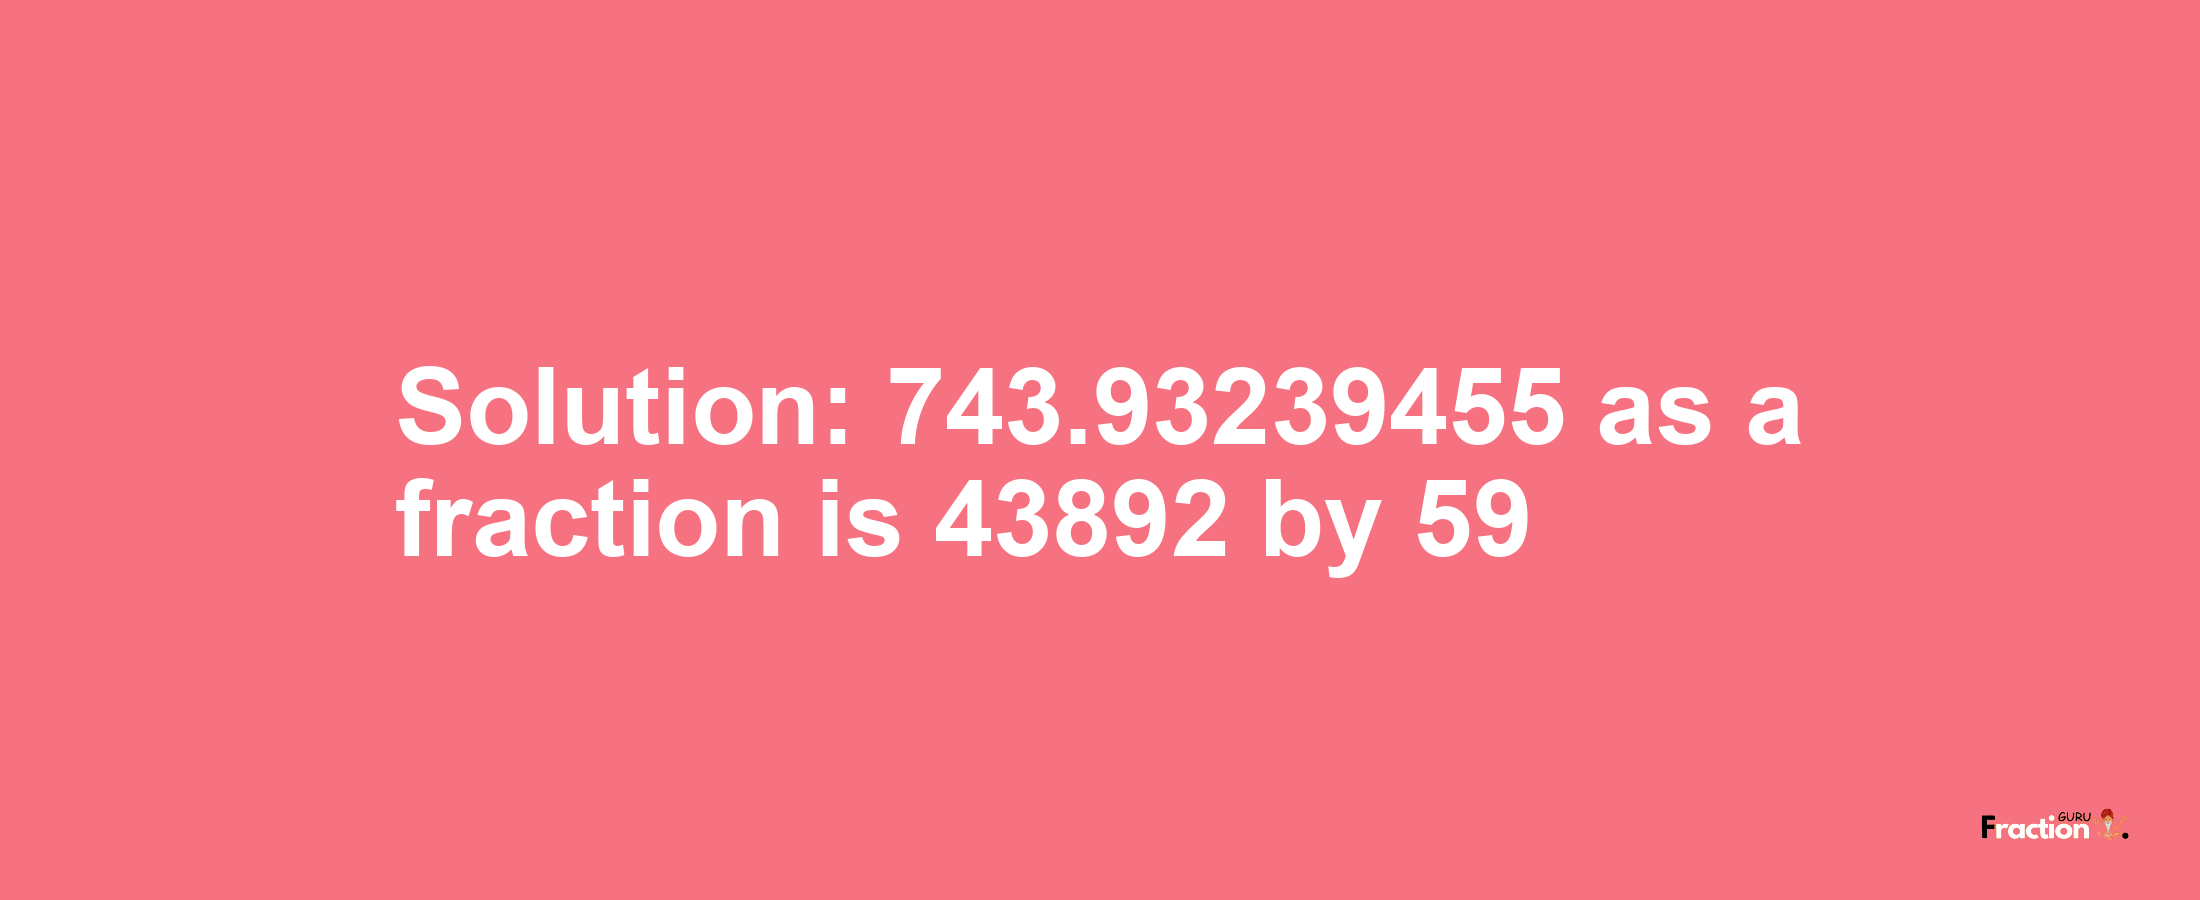 Solution:743.93239455 as a fraction is 43892/59